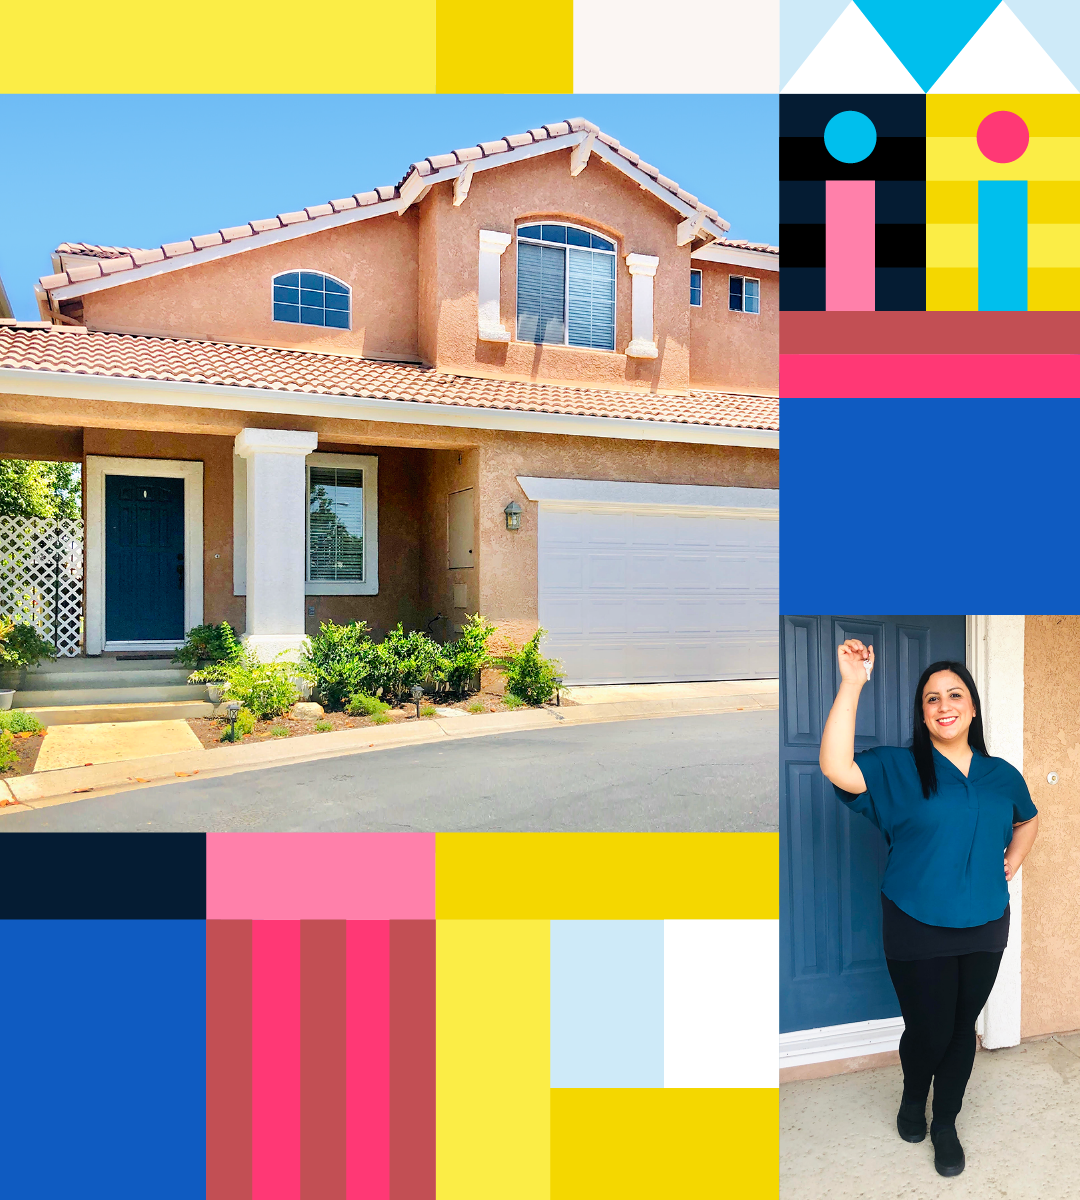 young woman and her new home with colorful shapes